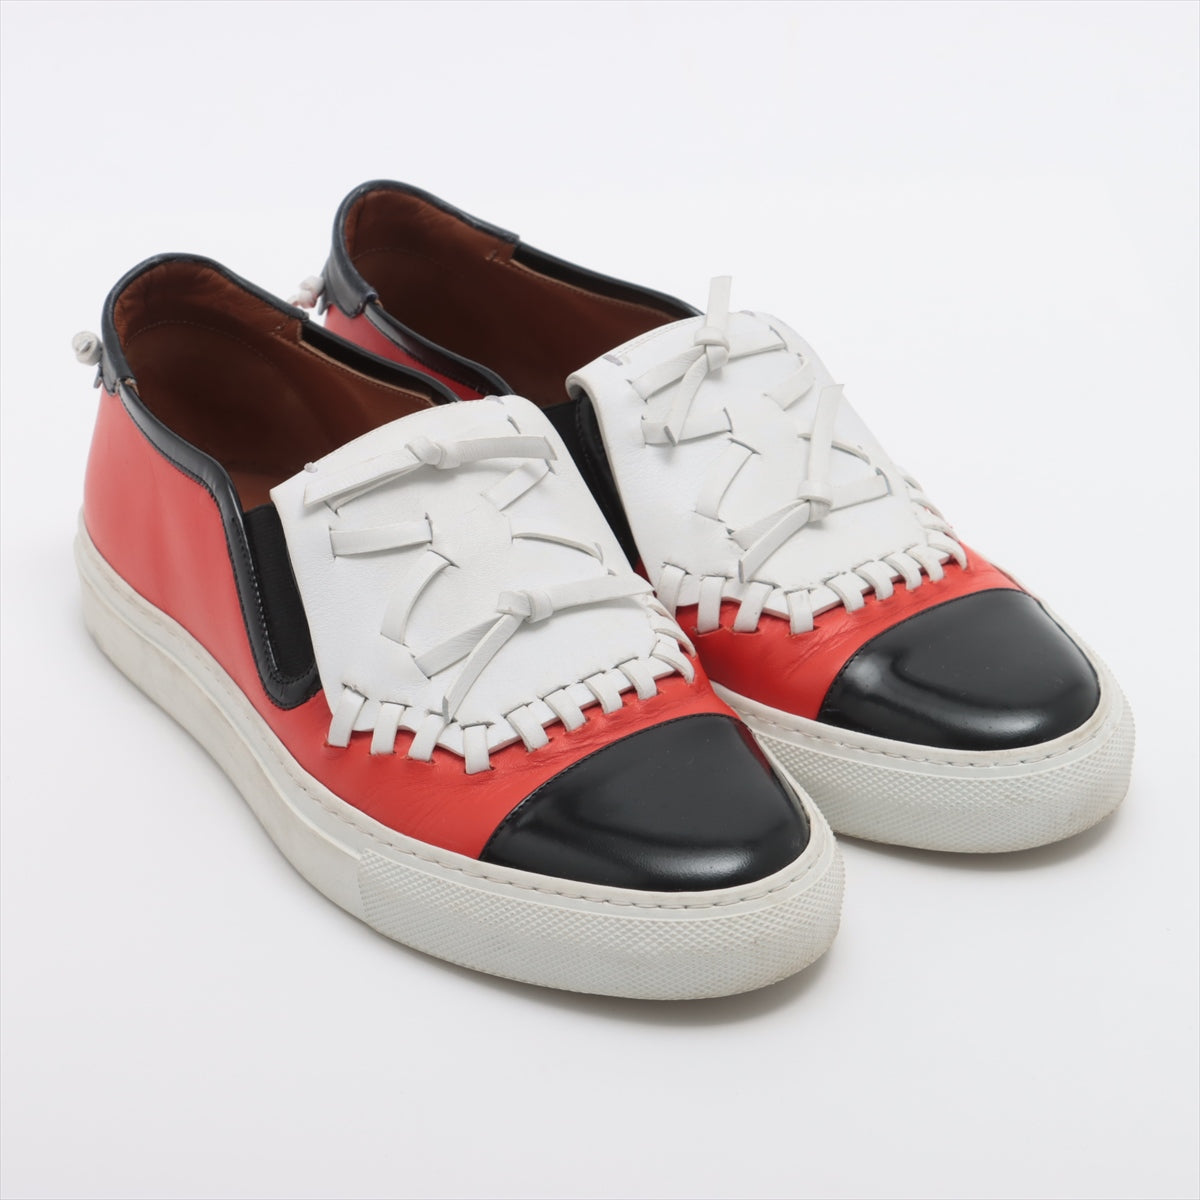 Givenchy Leather Sneakers Unknown size Ladies' Red x Black